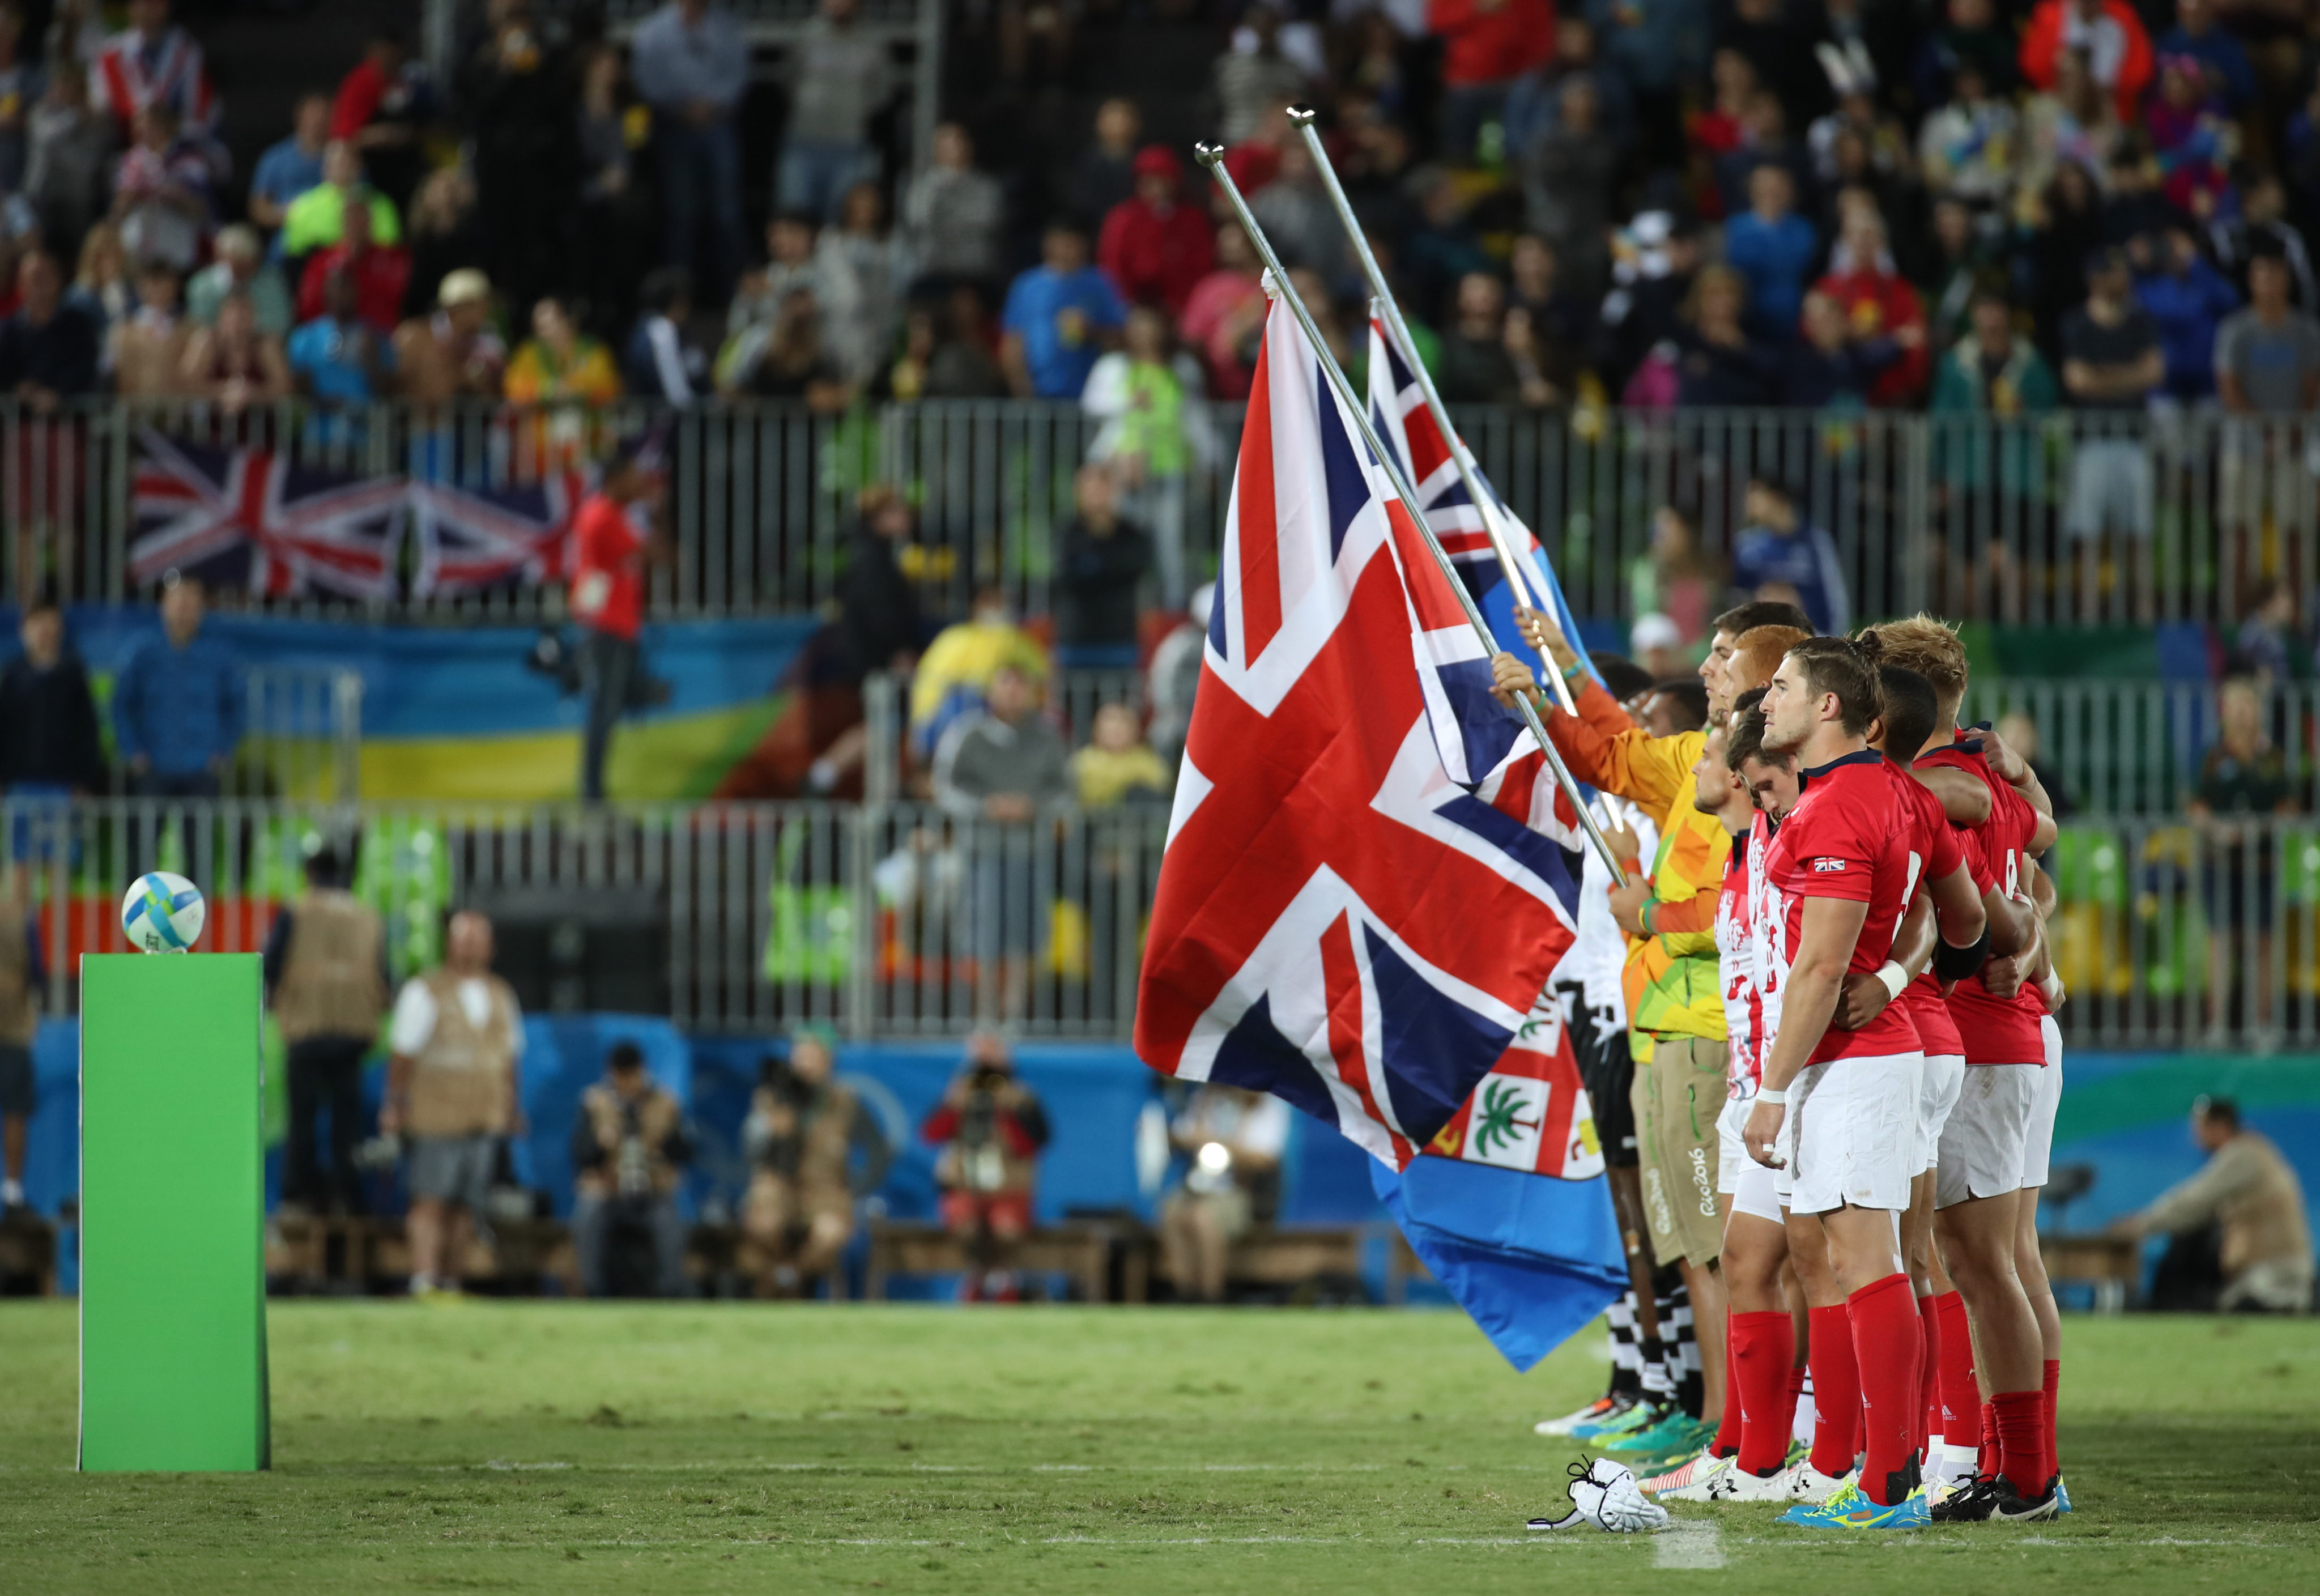 Great Britain line up before the men’s gold medal match against Fiji in the rugby sevens event at the Rio 2016 Olympic Games at Deodoro Stadium in Brazil. Photo: Getty Images